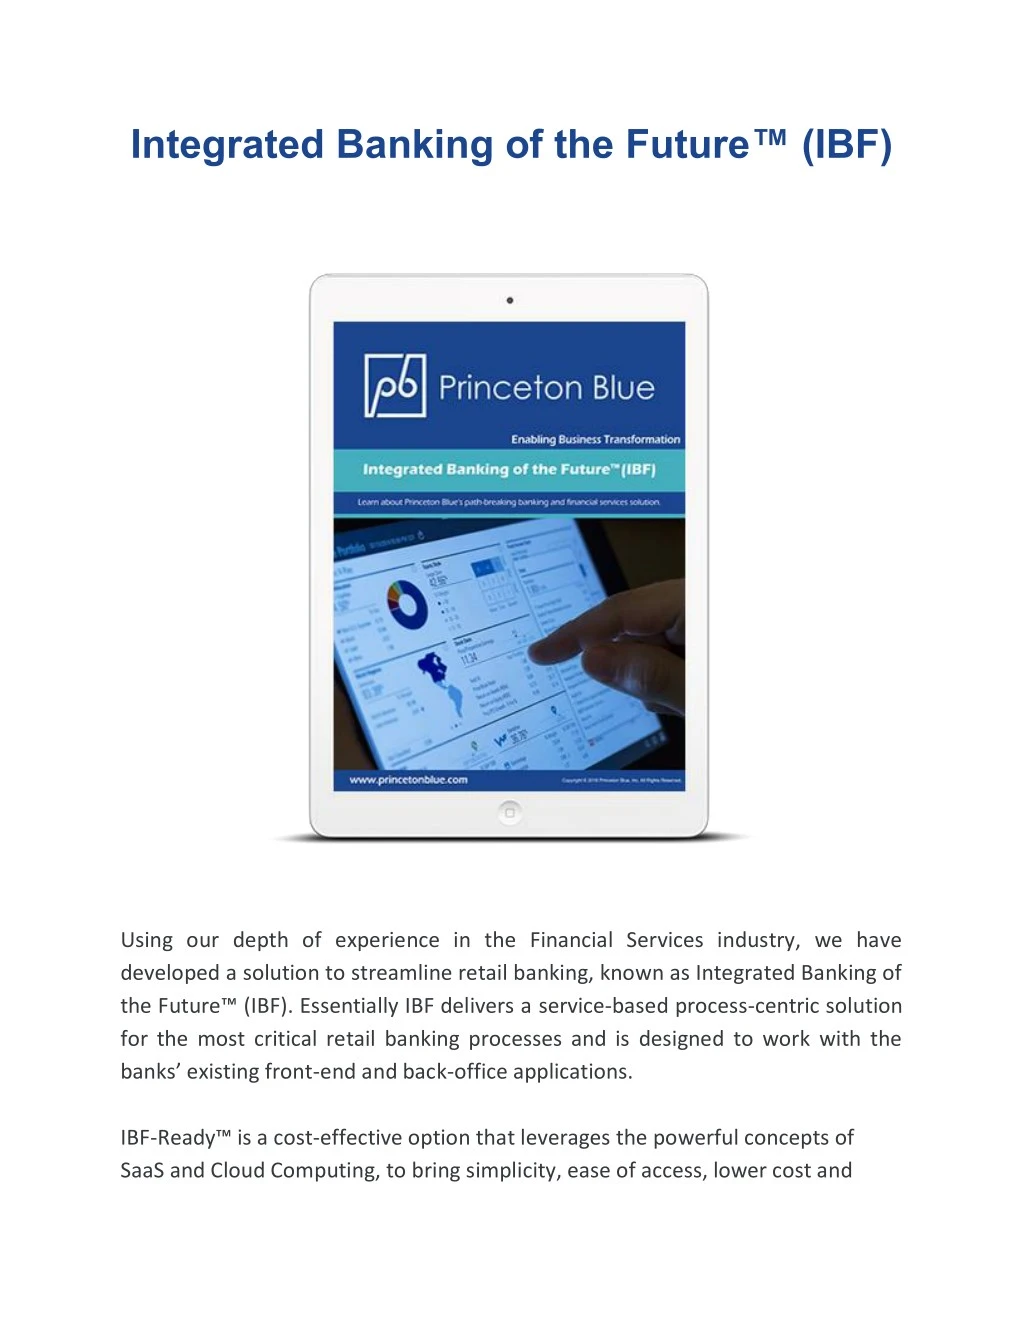 integrated banking of the future ibf